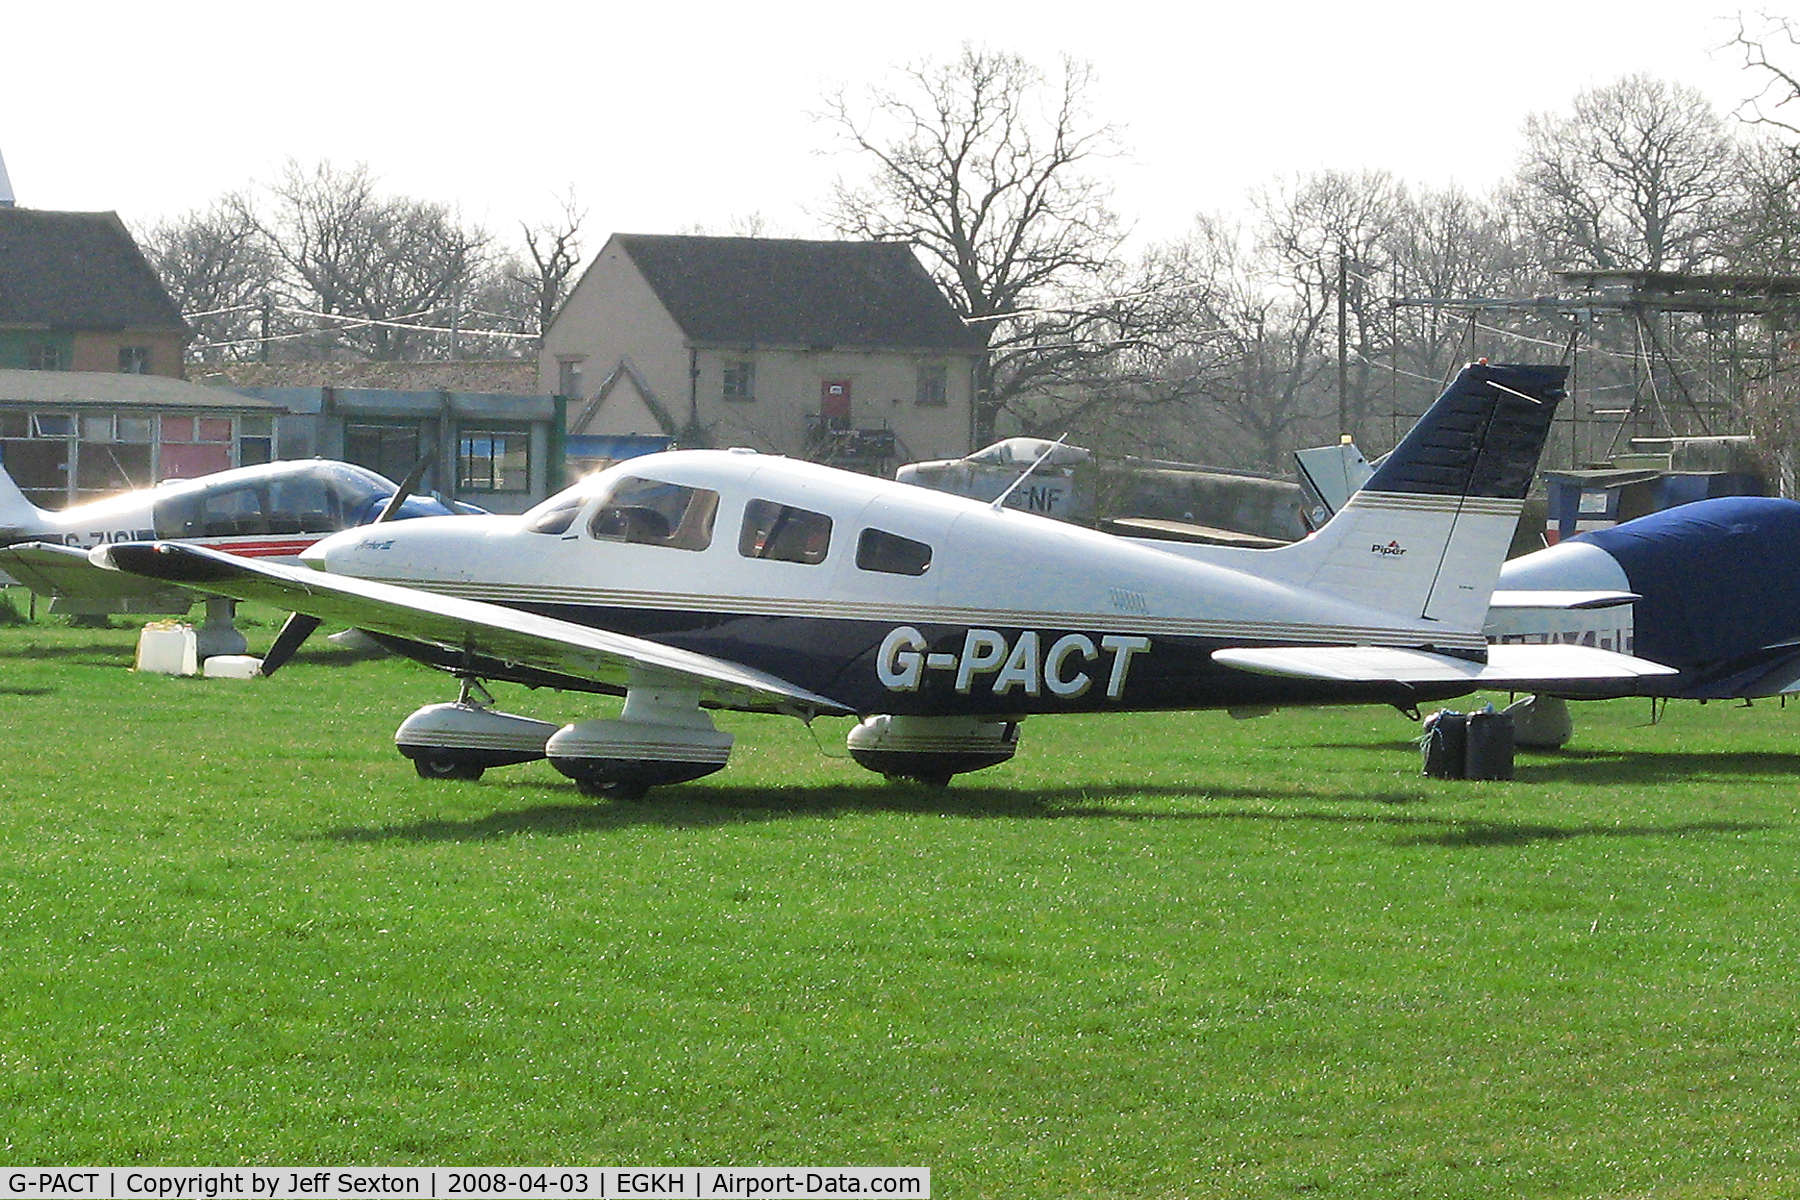 G-PACT, 2003 Piper PA-28-181 Cherokee Archer III C/N 2843546, Parked at Lashenden/Headcorn UK